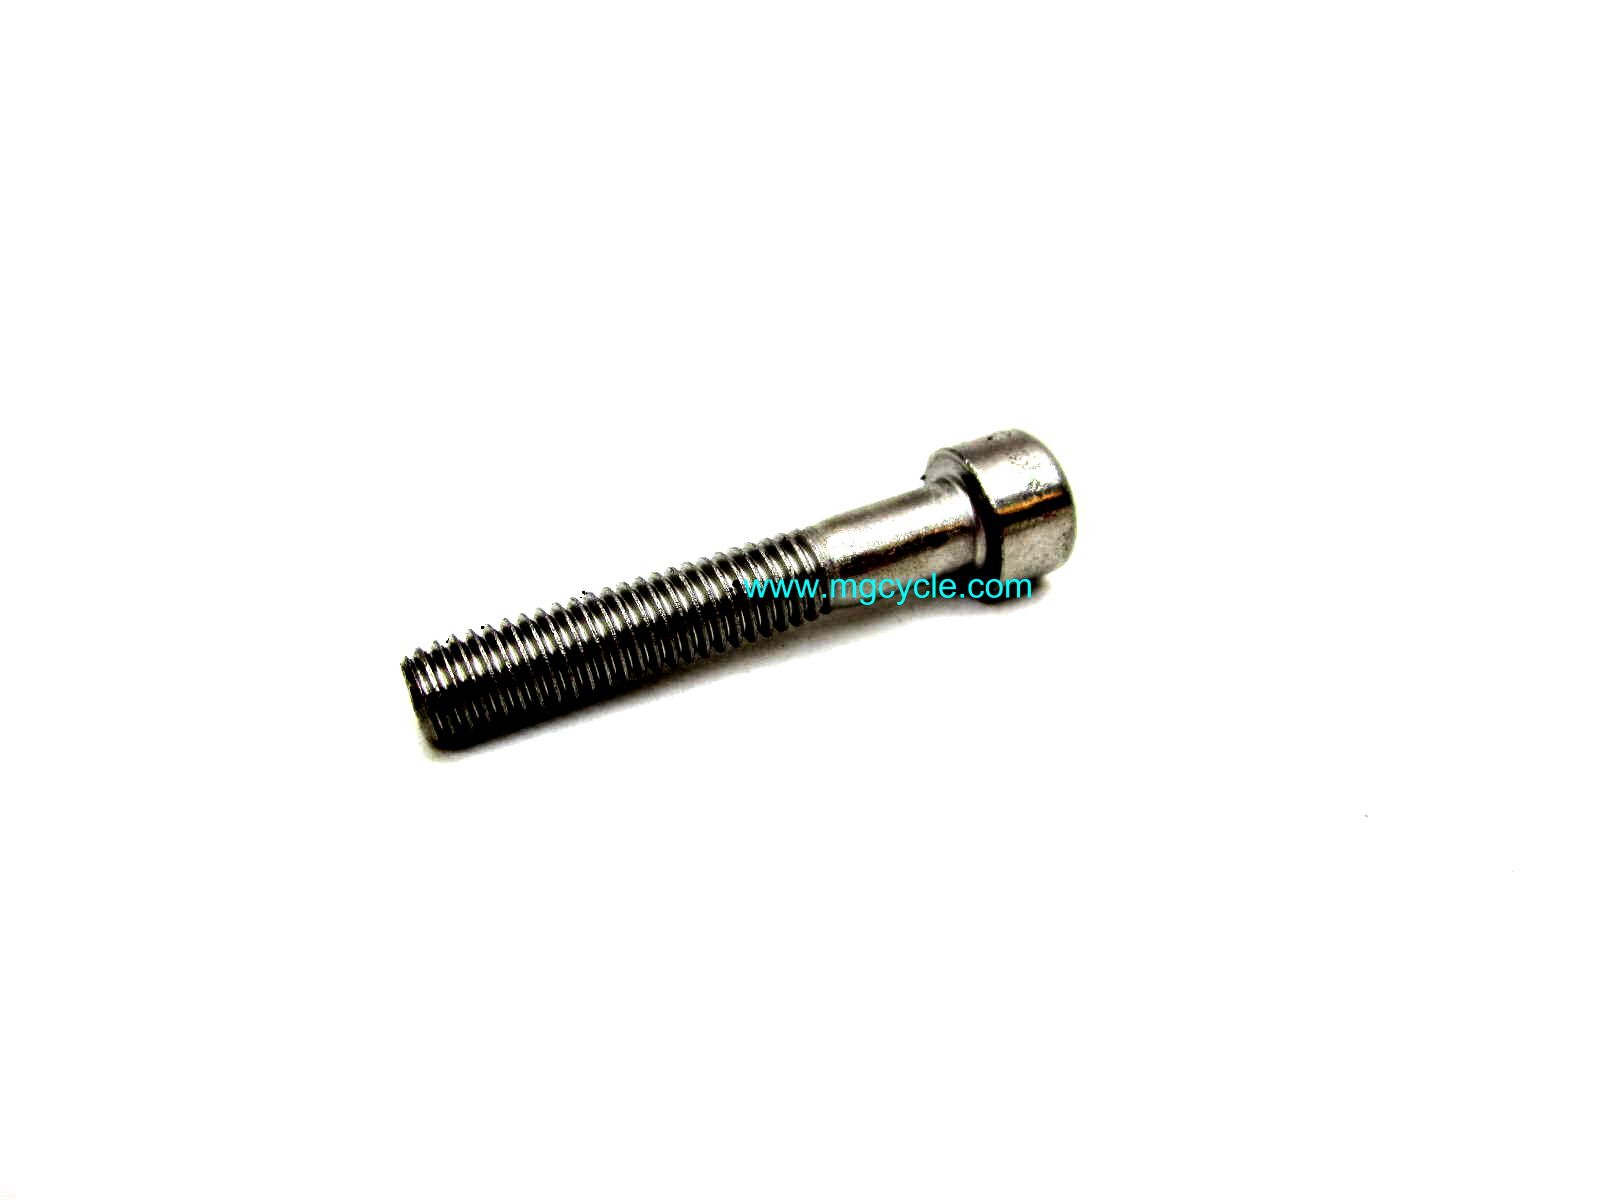 M6 allen head bolt, stainless steel, 35mm long - Click Image to Close